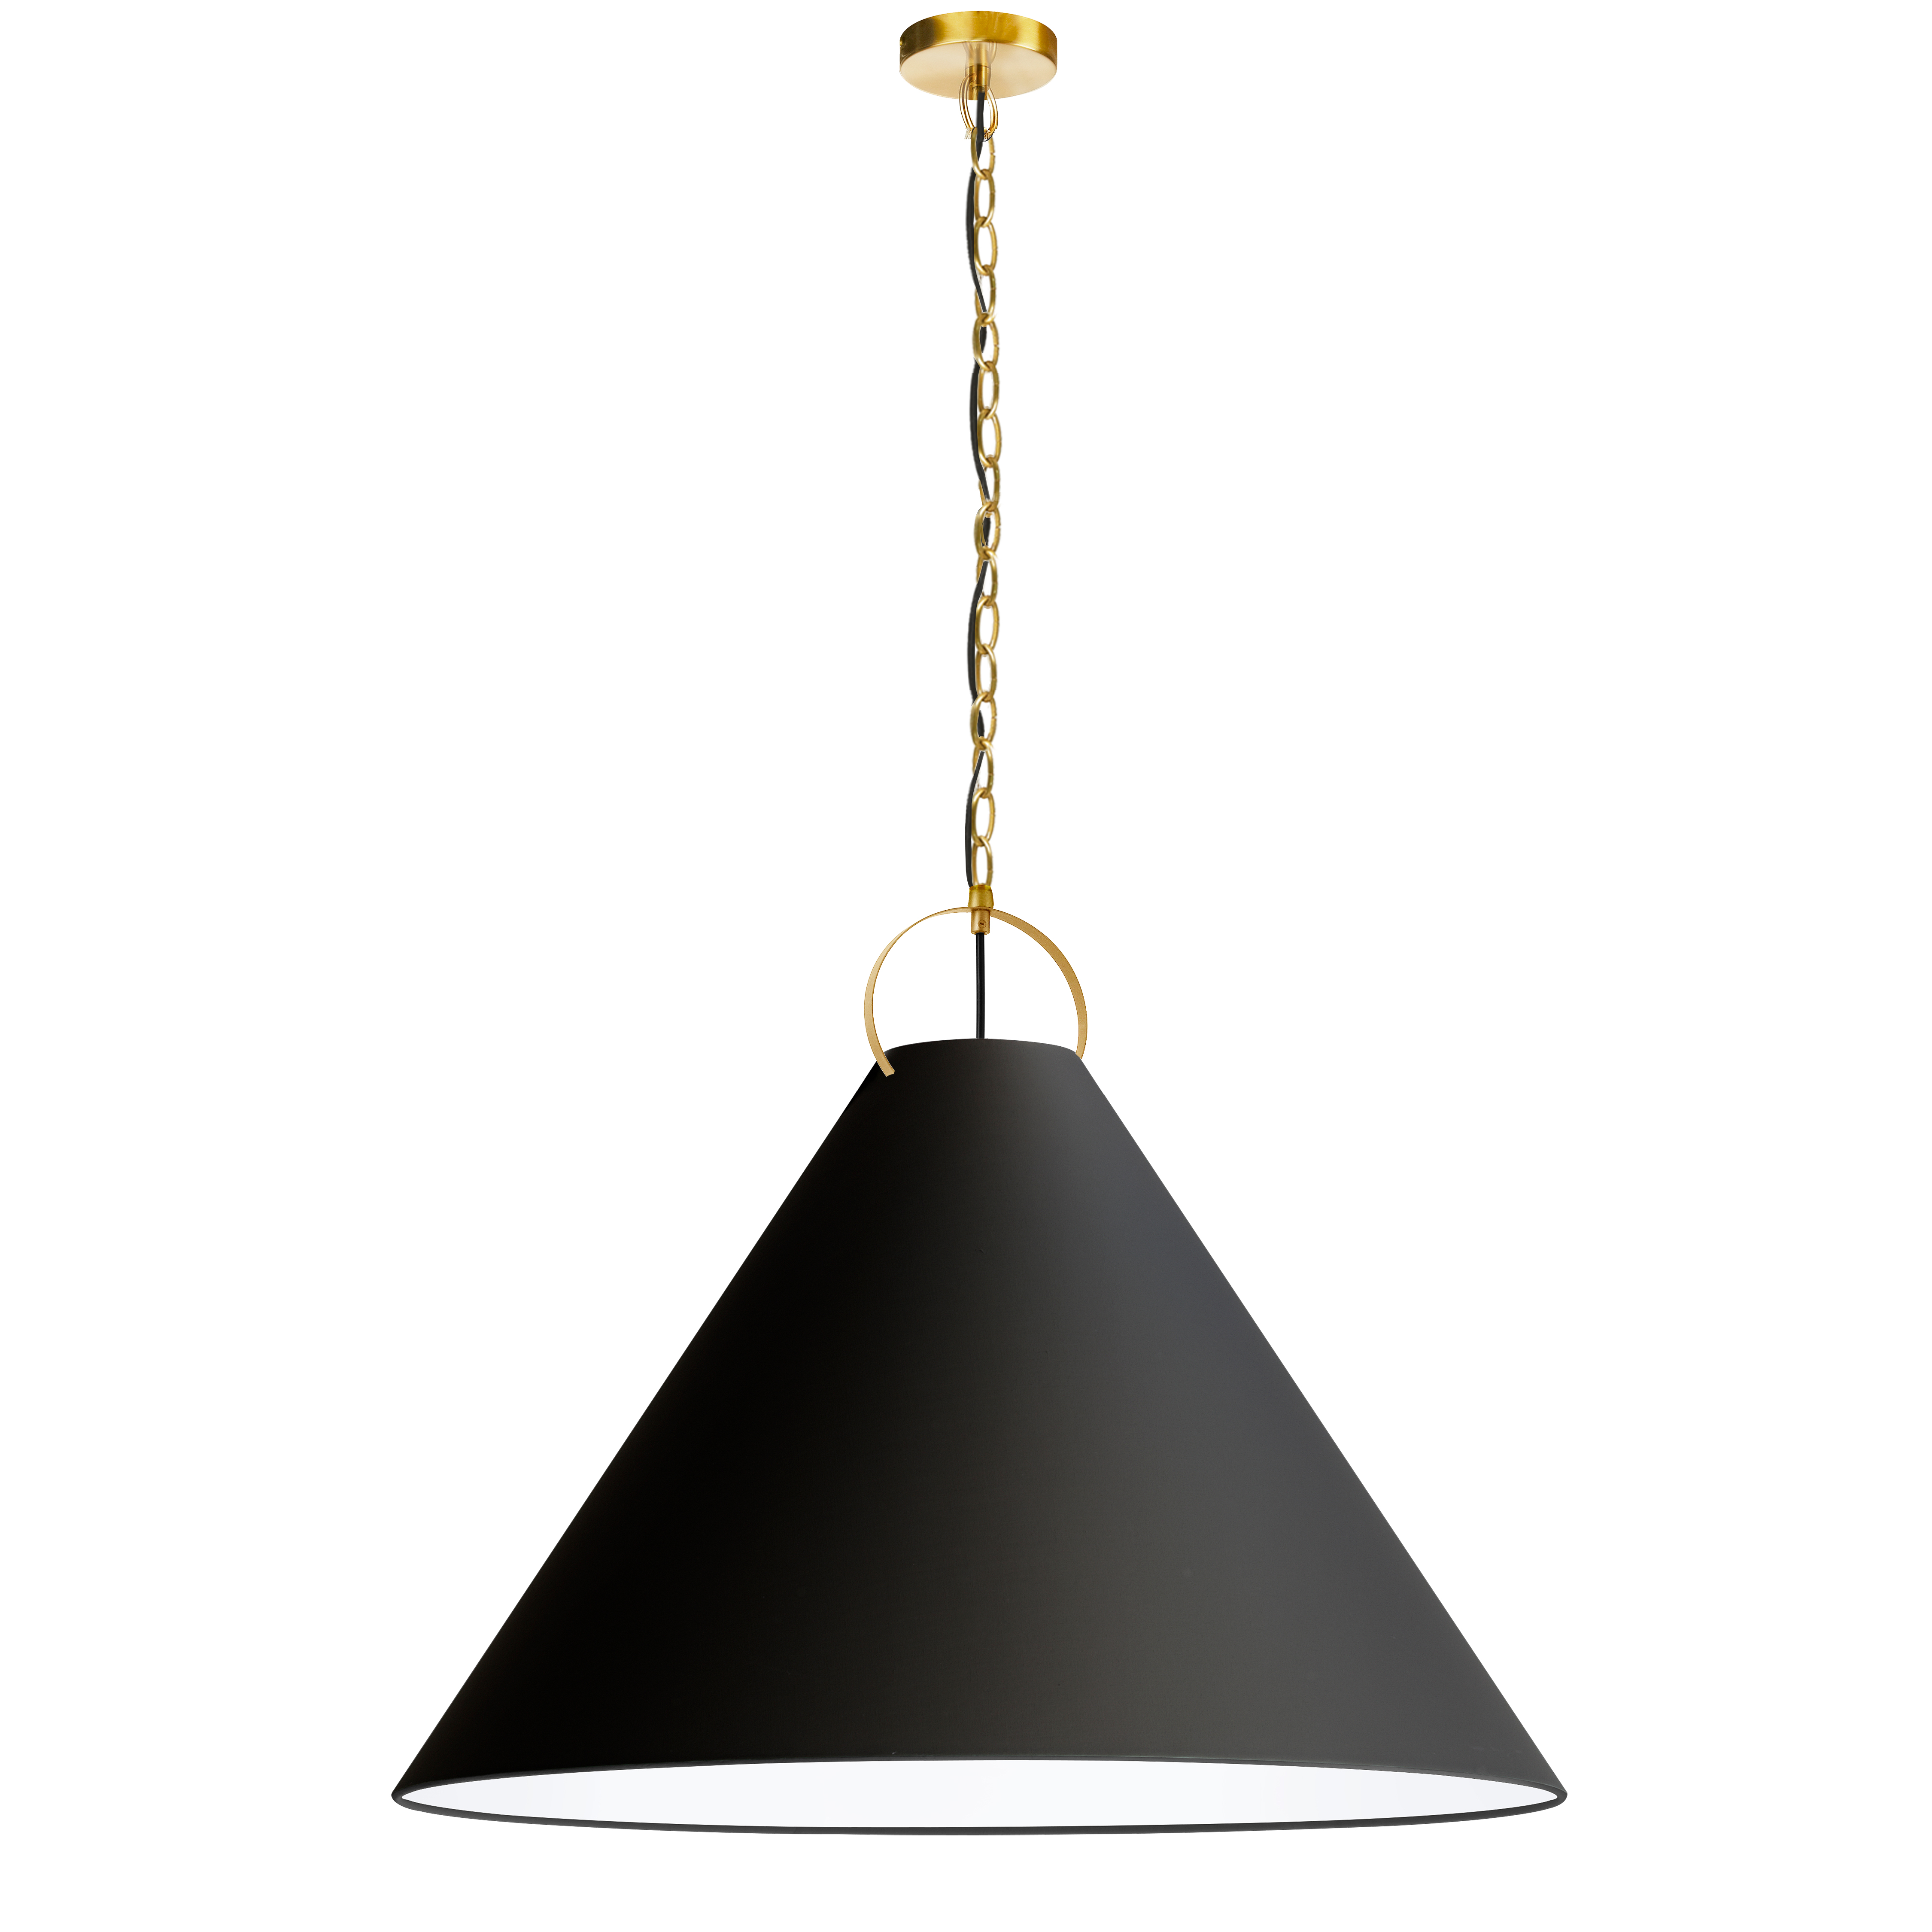 The Princeton family of lighting features a stylish profile that draws the eye. With its refined proportions and sense of detail, it comes in a range of sizes to suit any size room. A metal chain drop incorporates a circular element of the frame that encompasses the tapered end of the fabric drum shade. With color combinations from fashionable monochromatic to strikingly artful contrasts, it's a versatile look for contemporary homes. Princeton lighting adds a touch of elegance and luxury to kitchens and dining rooms, and sets a chic tone for the foyer of your home.